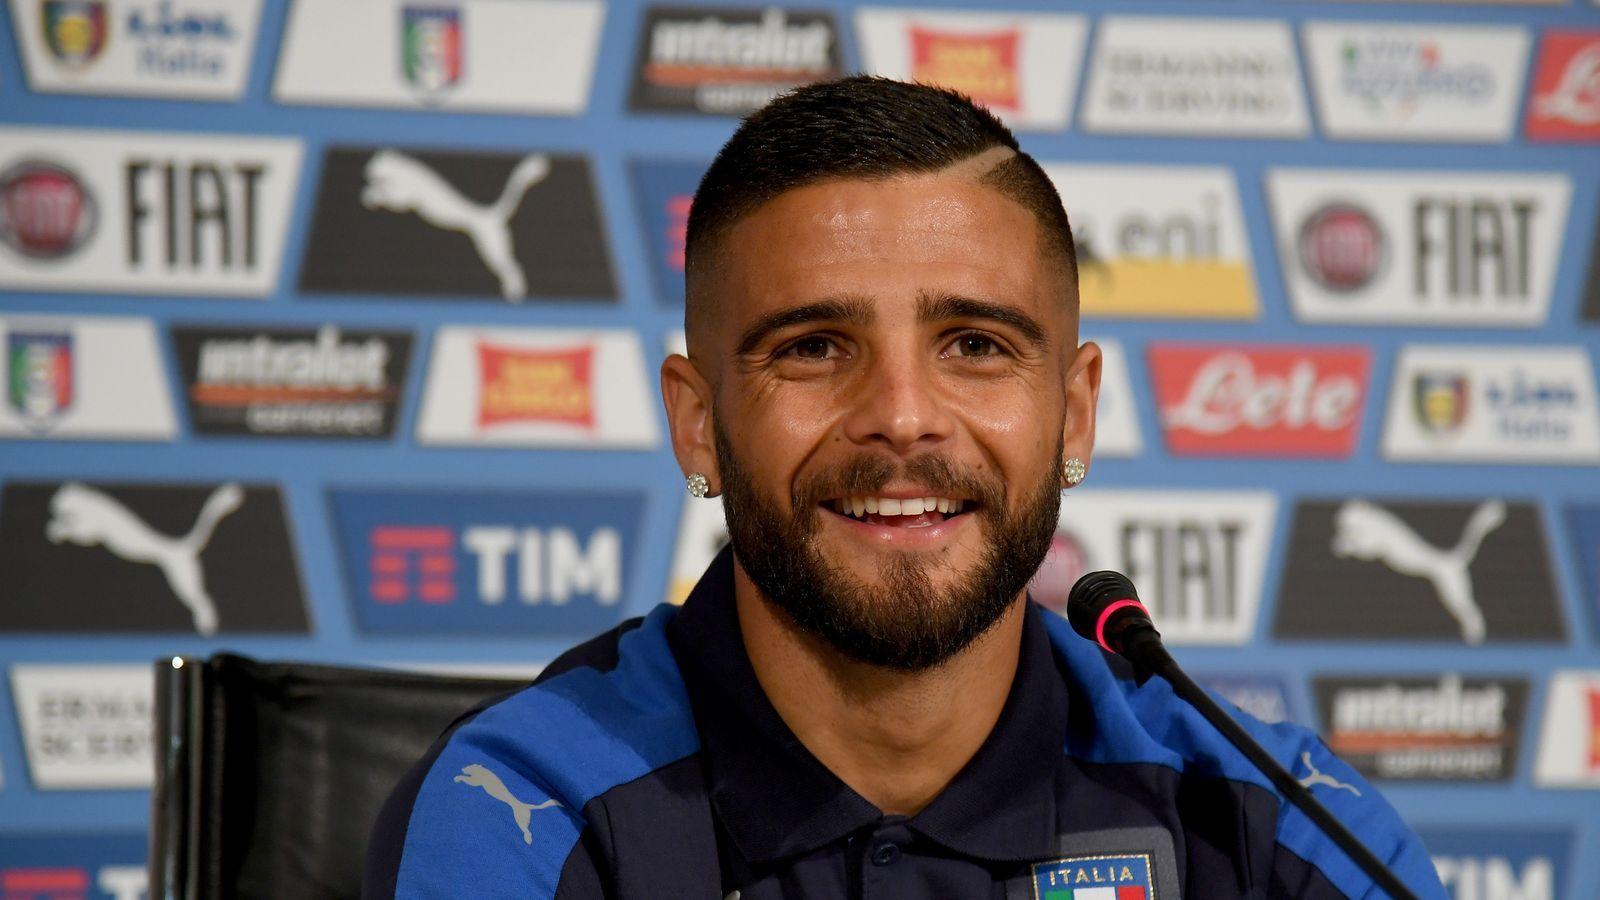 Lorenzo Insigne's agent rubbishes the Chelsea rumor from The Sun